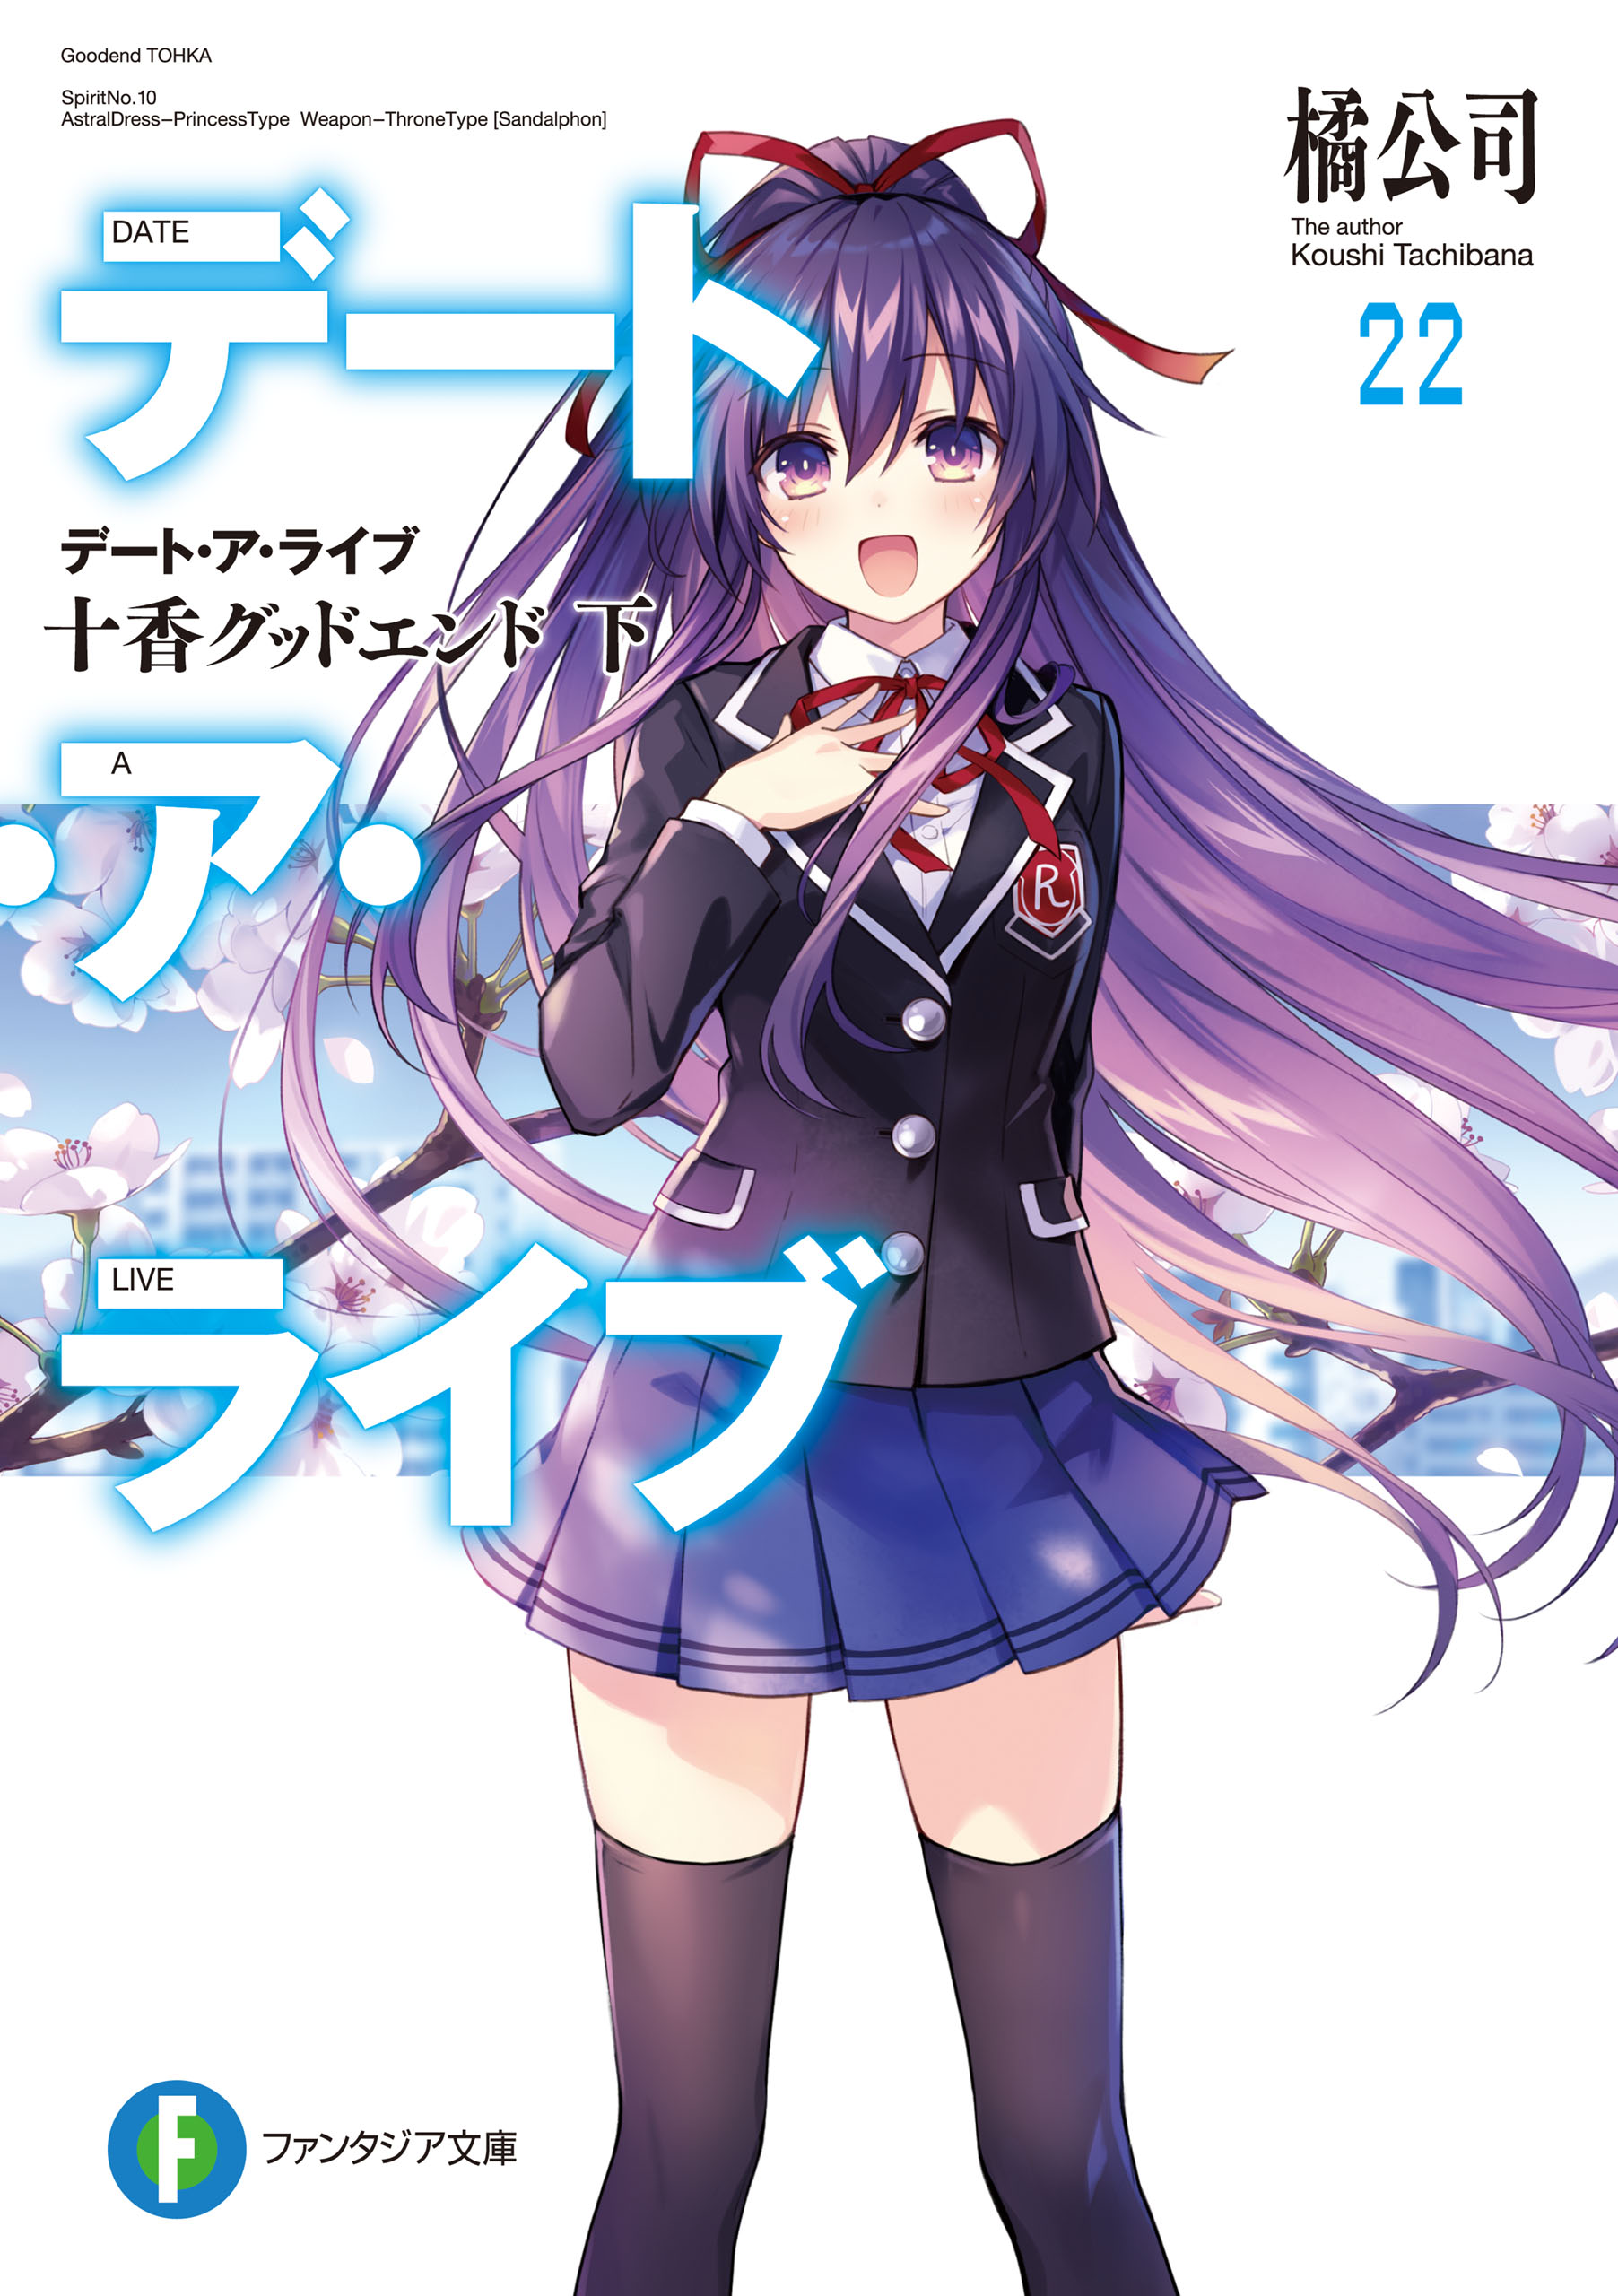 Date A Live Volume 1 Review - But Why Tho?